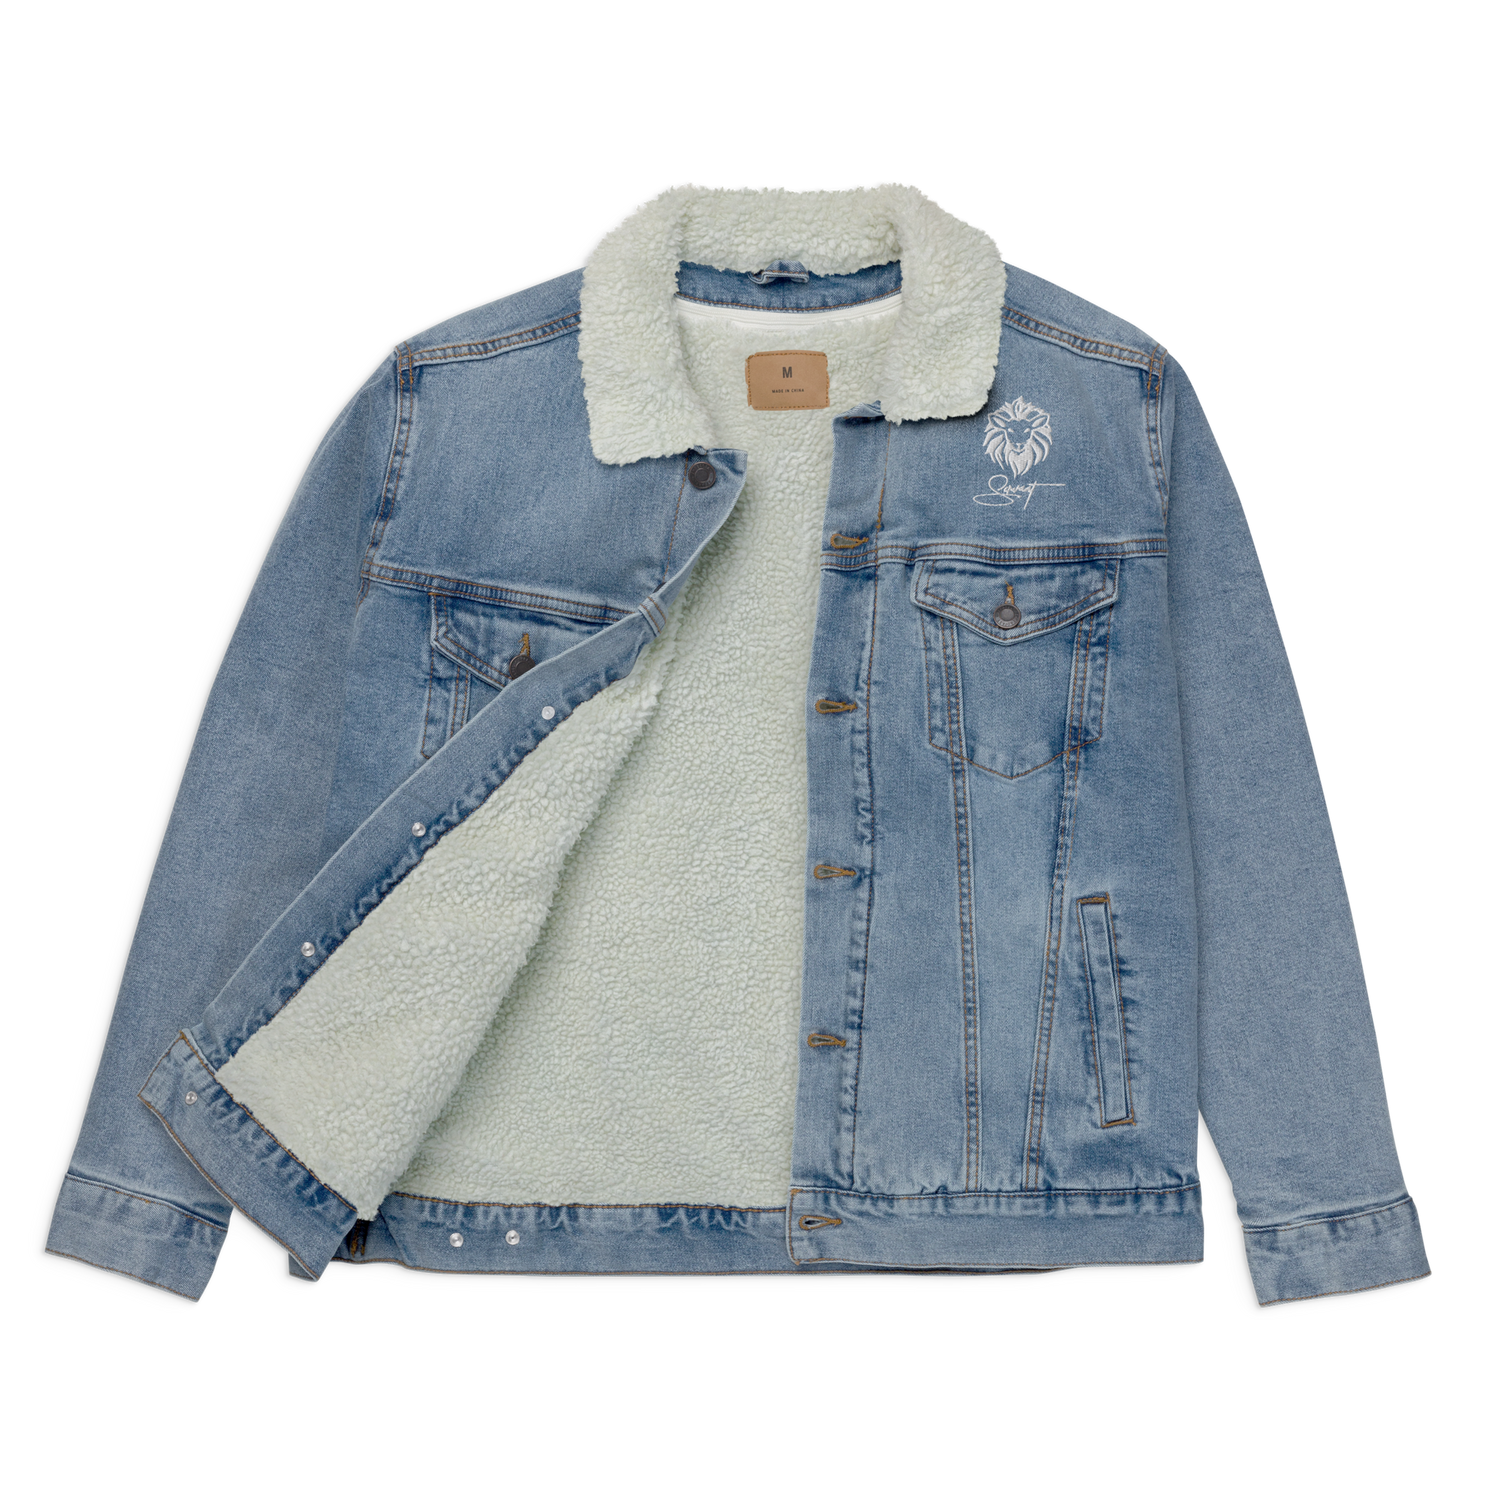 Denim Jacket Women Cropped Solid Color Ripped Distressed Cropped Casual Jean  Jacket Coat with Frayed Hem at Amazon Women's Coats Shop